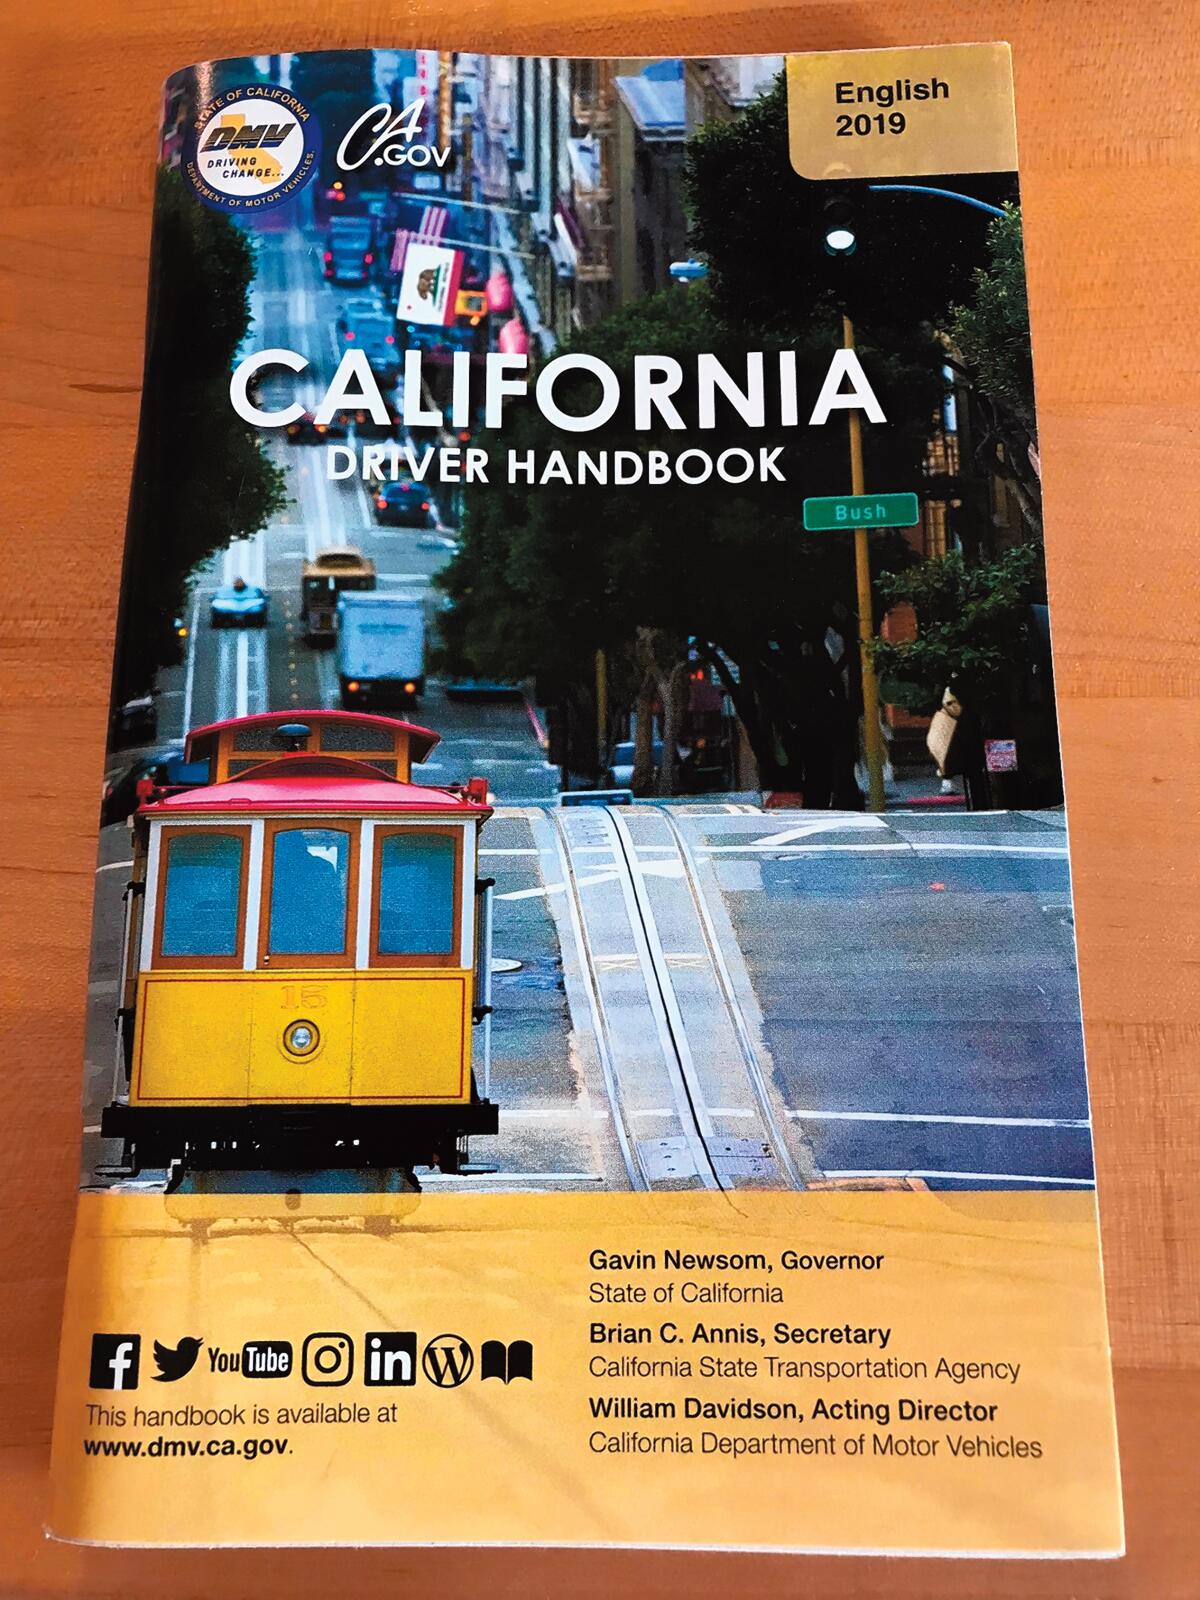 The cover of the California Driver Handbook